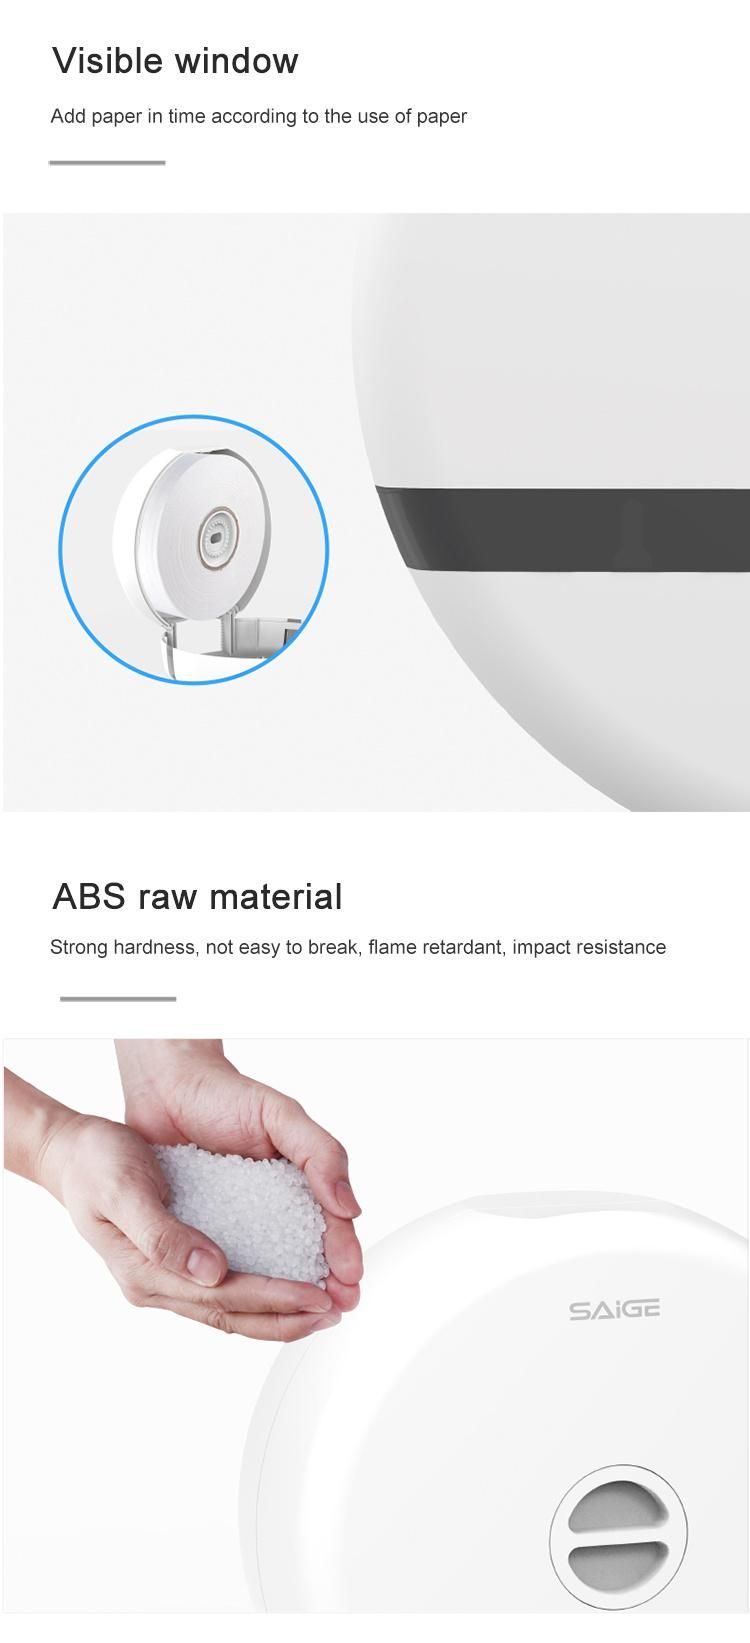 Saige Wall Mounted High Quality ABS Plastic Jumbo Toilet Roll Tissue Dispenser